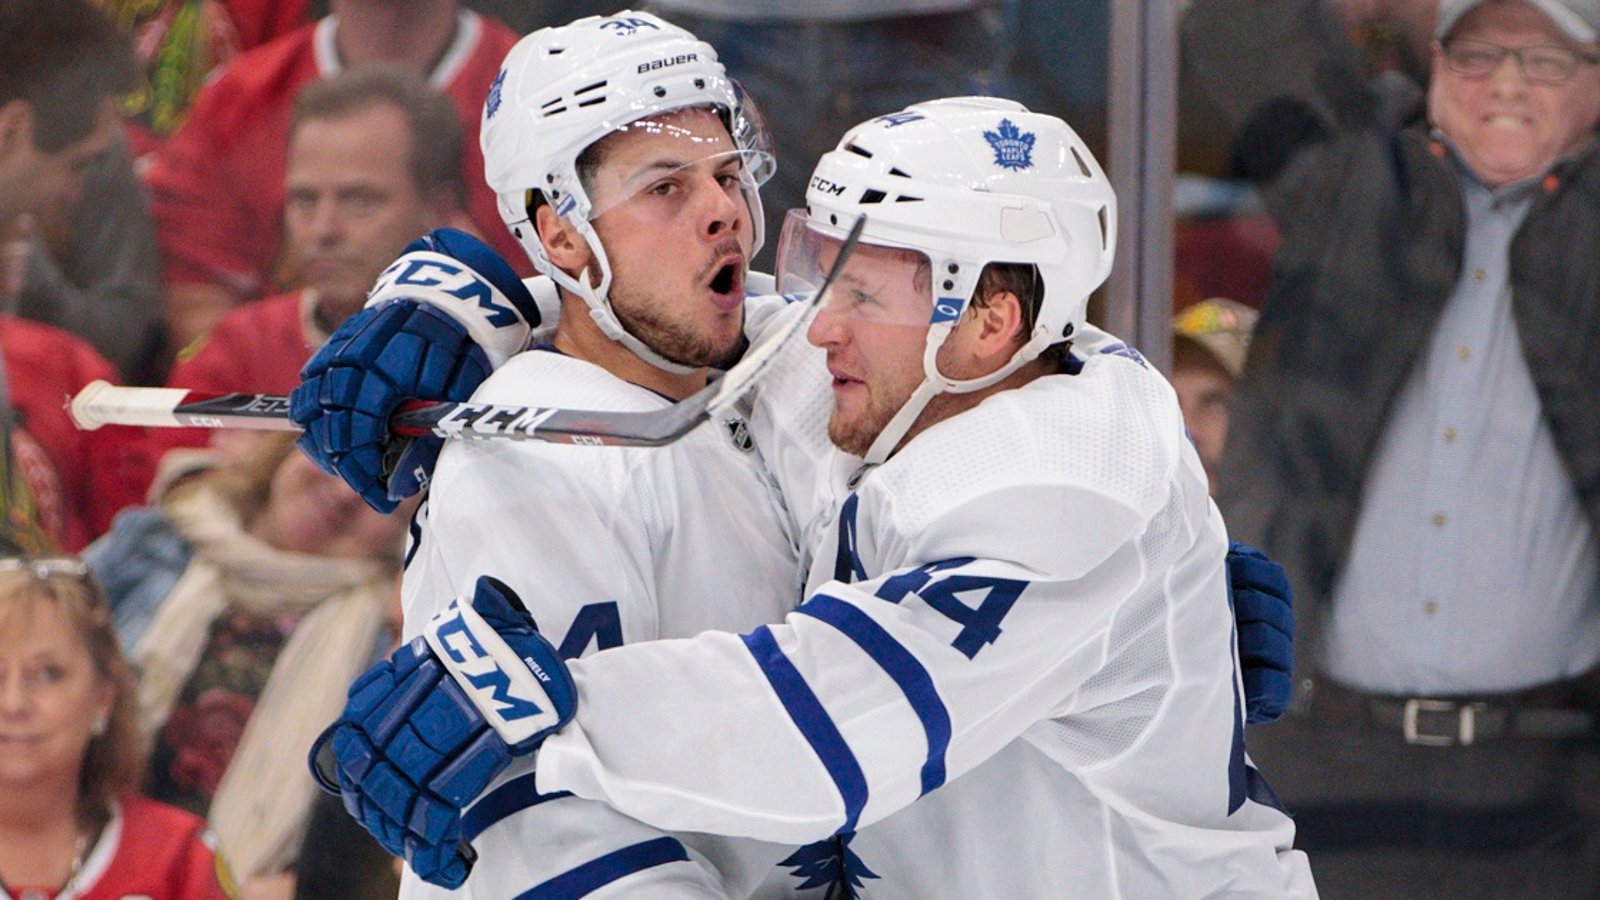 Two NHL insiders provide details on just how much Matthews will cost the Leafs.